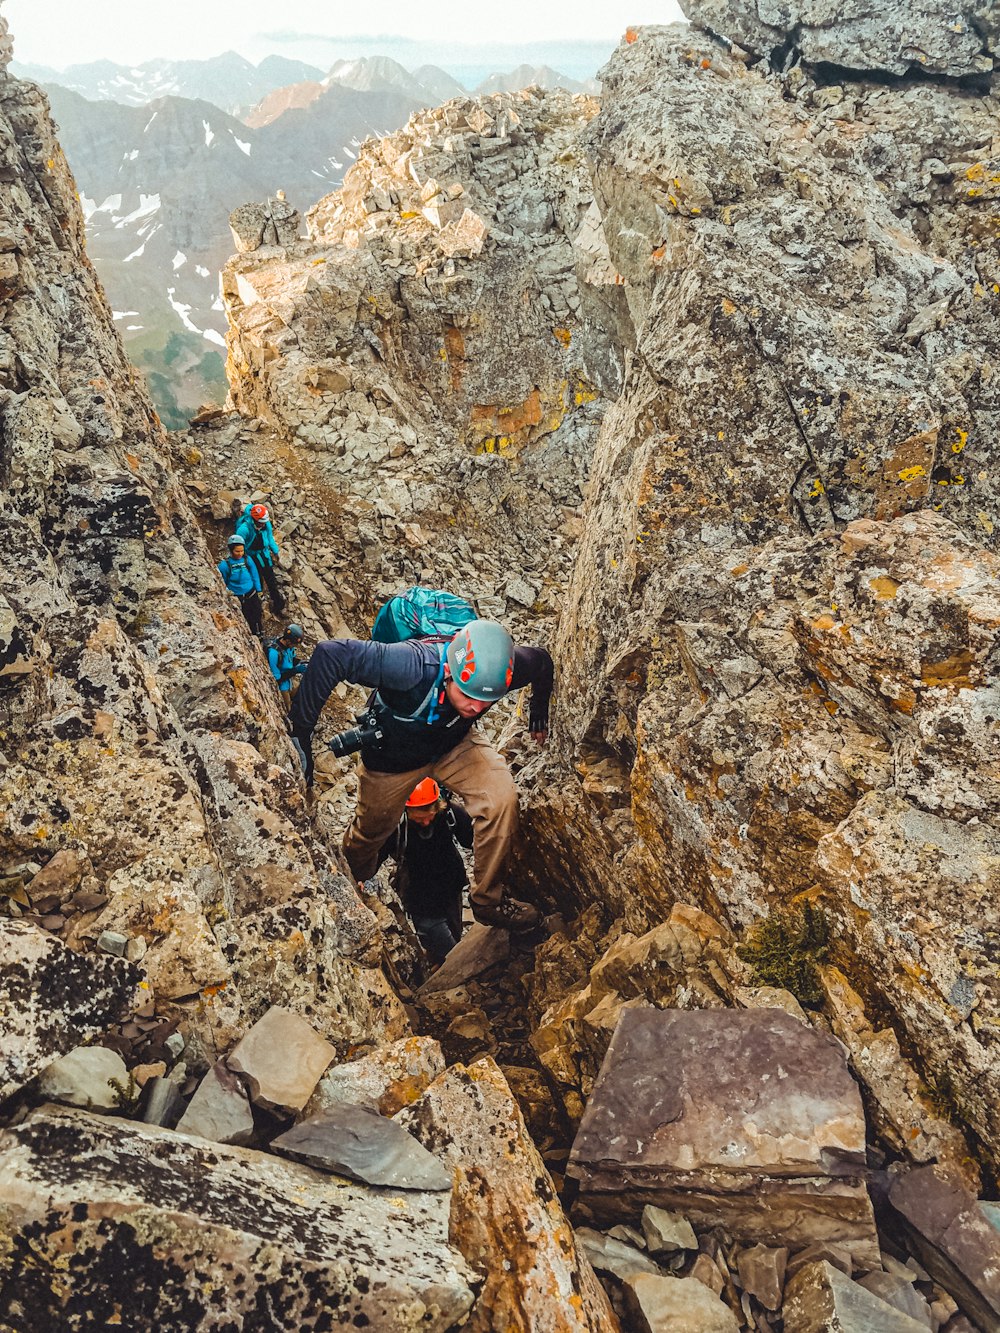 man in black jacket and blue backpack climbing on rocky mountain during daytime